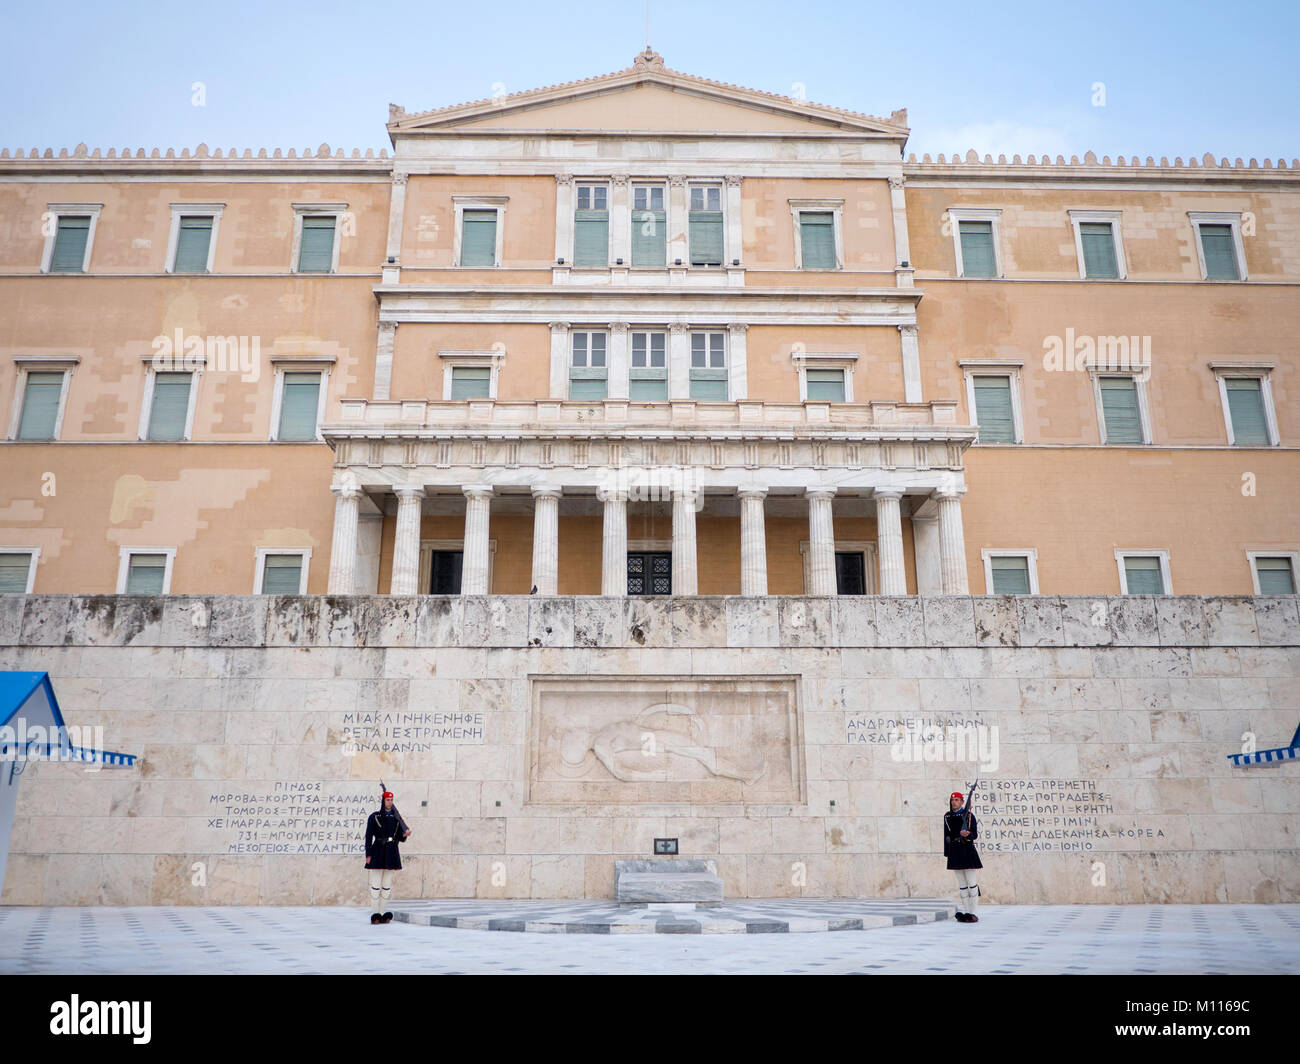 ATHENS,GREECE - MARCH 26, 2016: The Greek Presidential guards called Tsoliades dressed in traditional uniform at the monument of the unknown soldier i Stock Photo